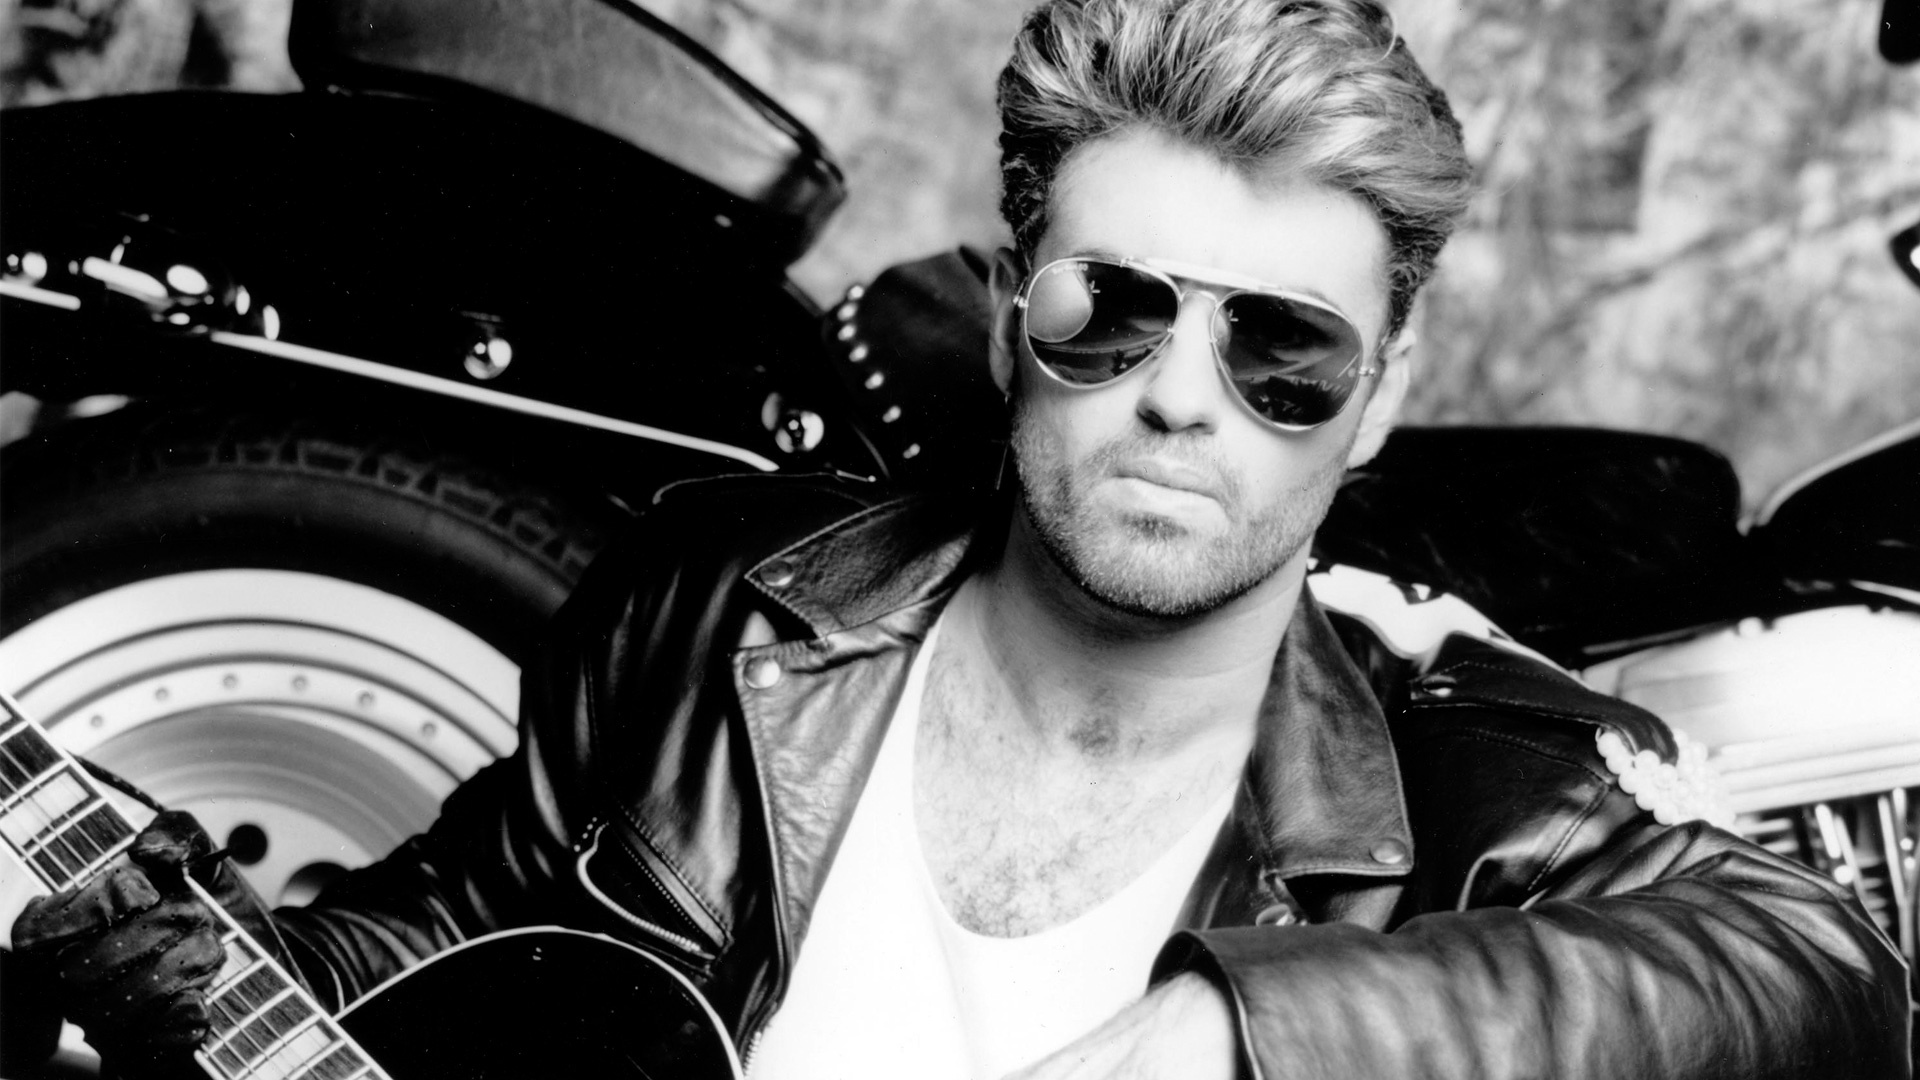 George Michael: A ground-breaking British pop artist who has sold more than 120 million records worldwide. 1920x1080 Full HD Background.